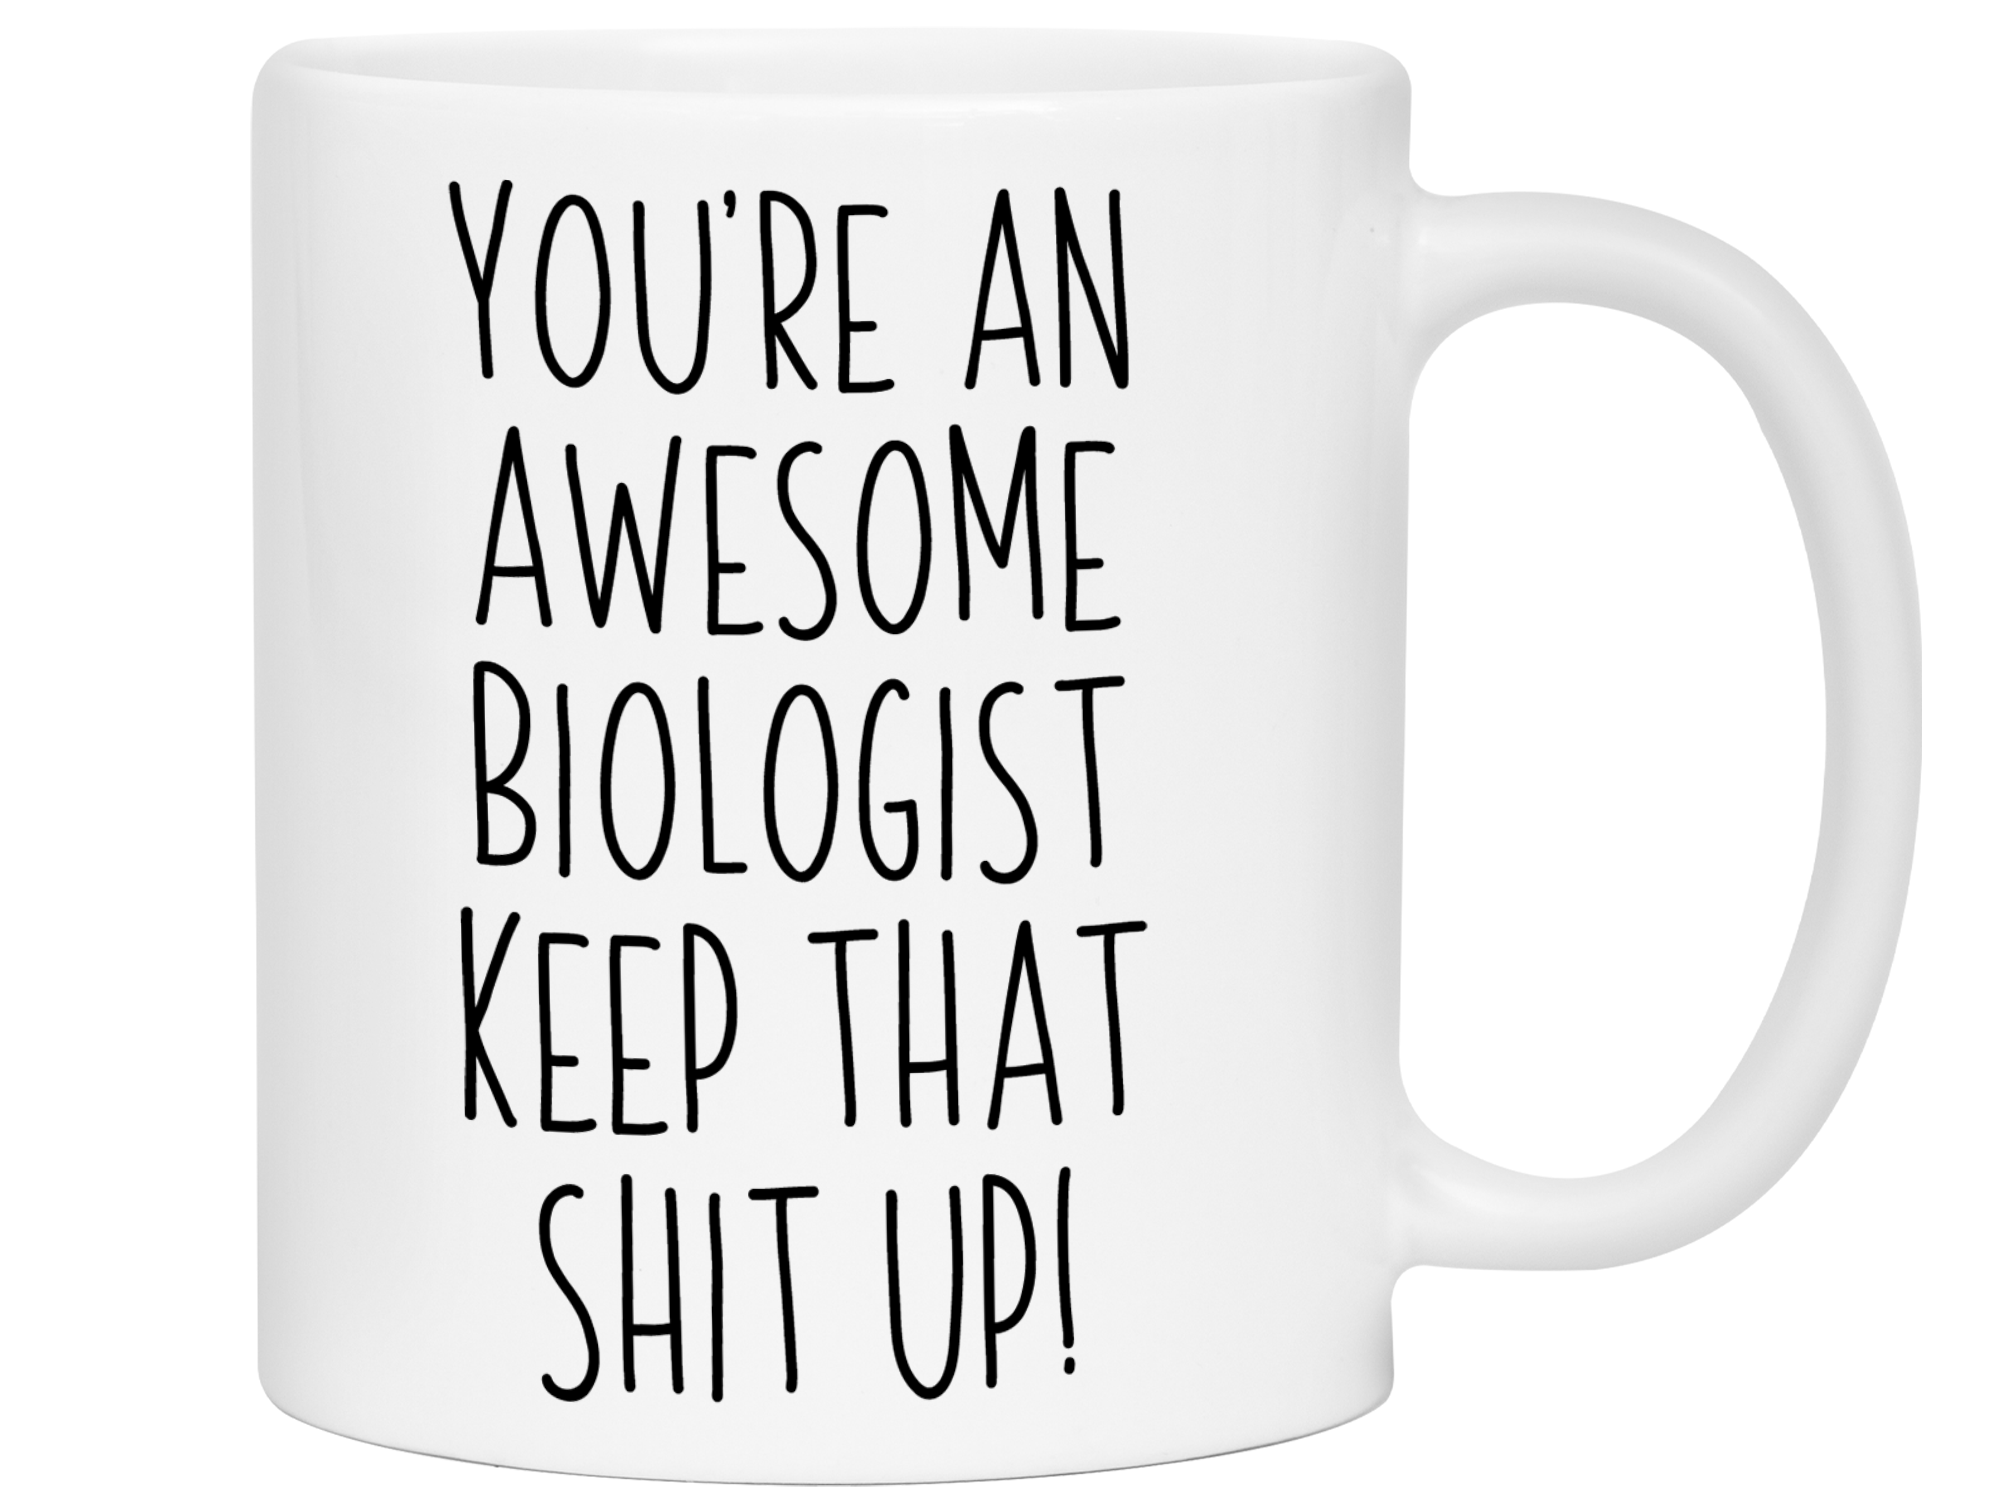 Gifts for Biologists - You're an Awesome Biologist Keep That Shit Up Coffee Mug